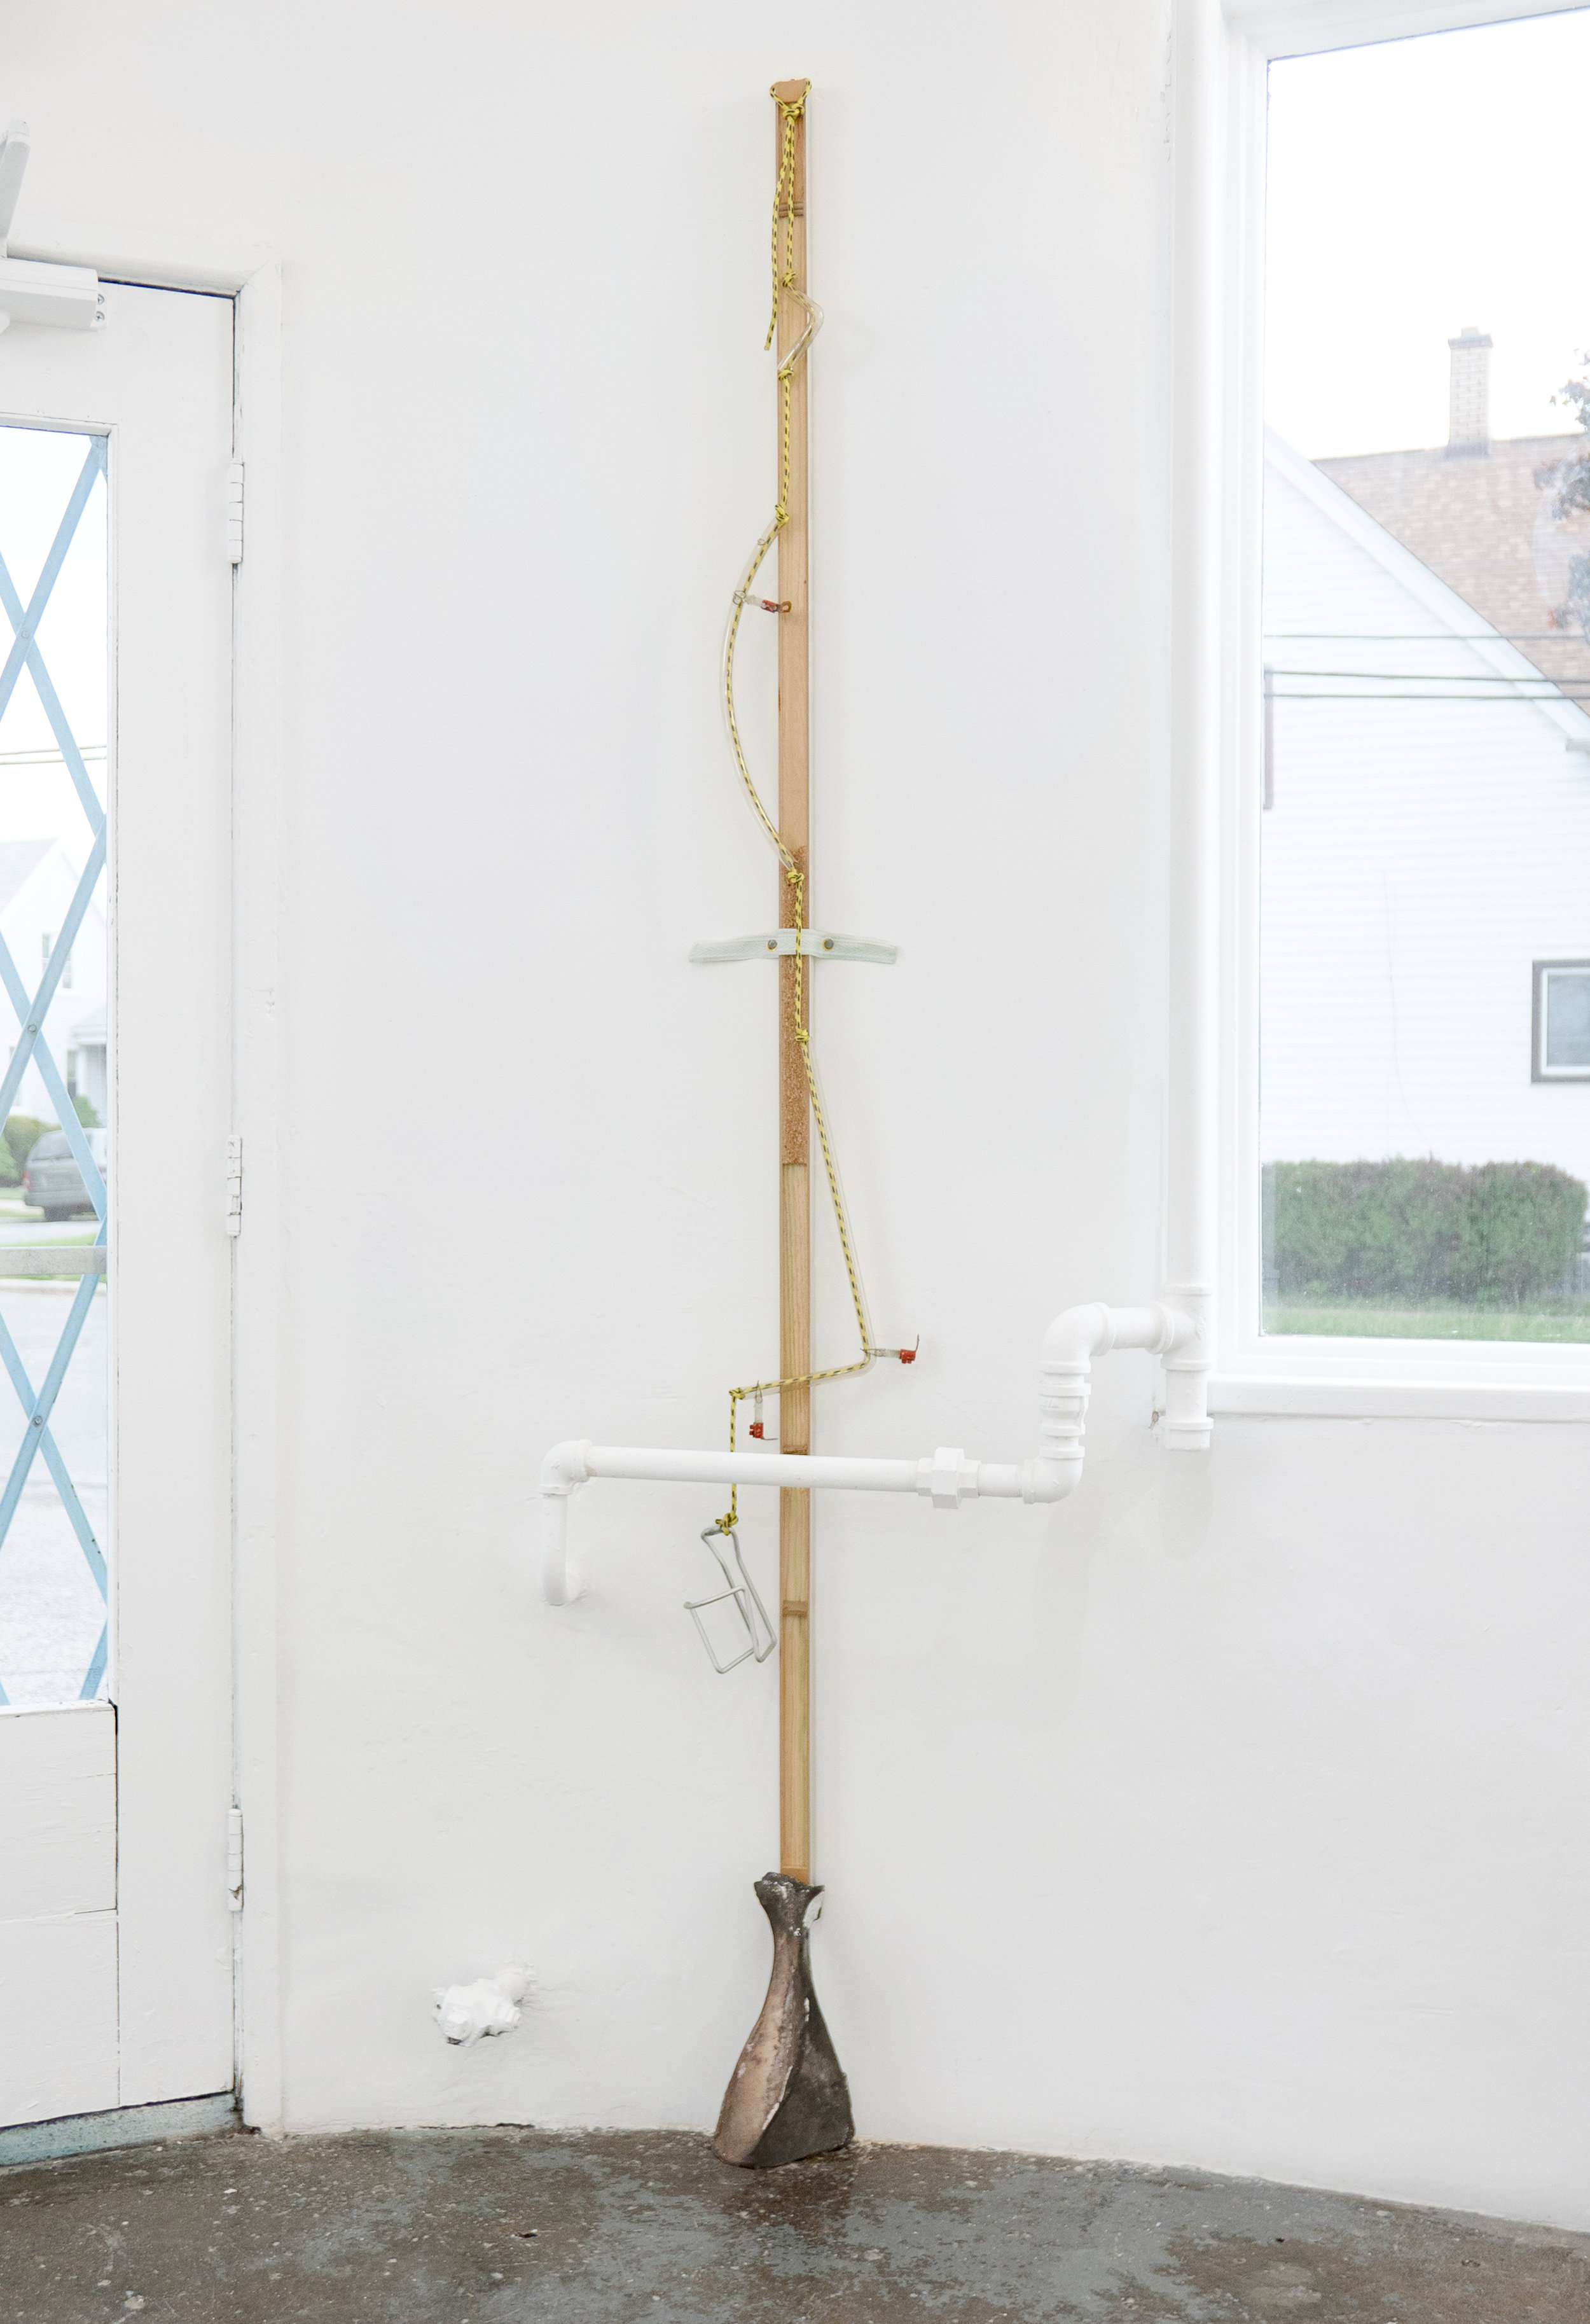  Matt Siegel,  W , 2018, Raw bronze, hollow core door, accessory cord, neon glass tubing (sourced: abandoned China Buffet, Evanston, WY), found object, earth, 92 x 8 x 5 in 